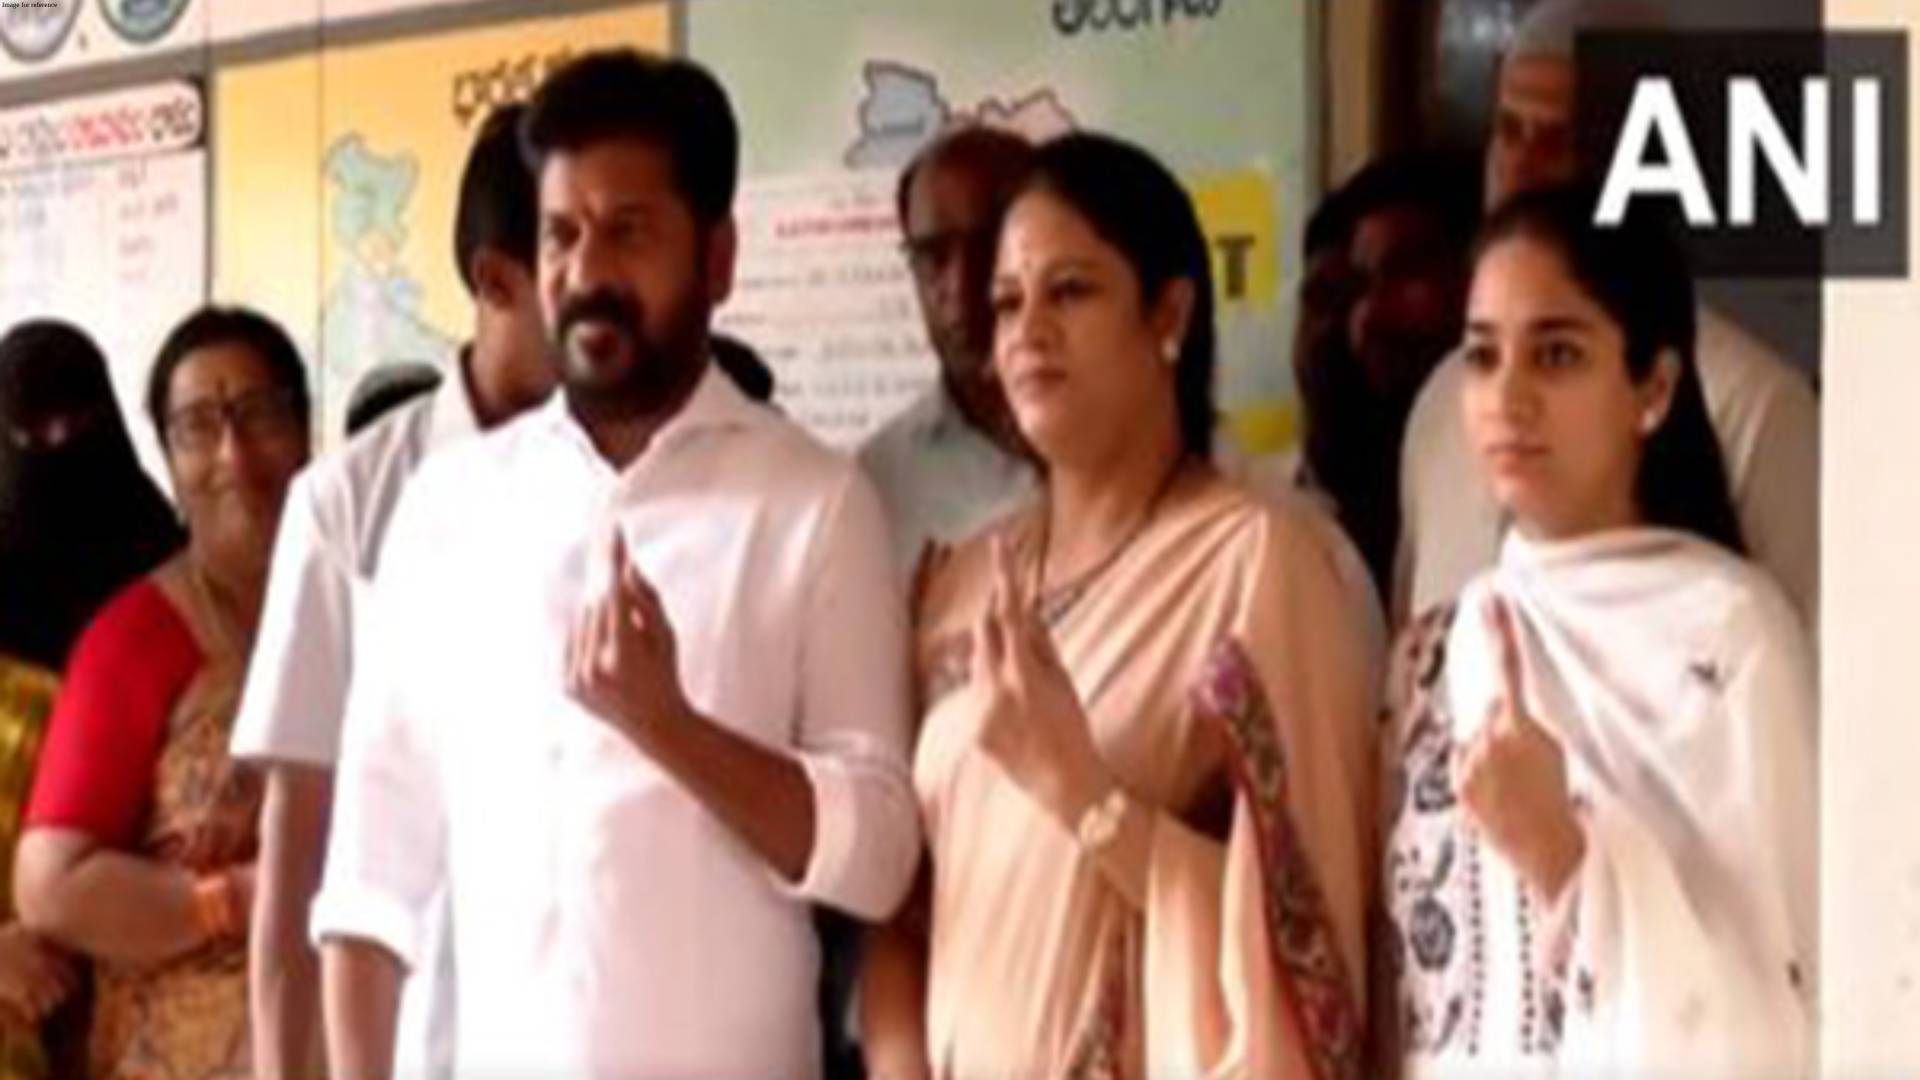 LS polls: Telangana CM Revanth Reddy casts vote in Kodangal, says 'Voting is our responsibility'